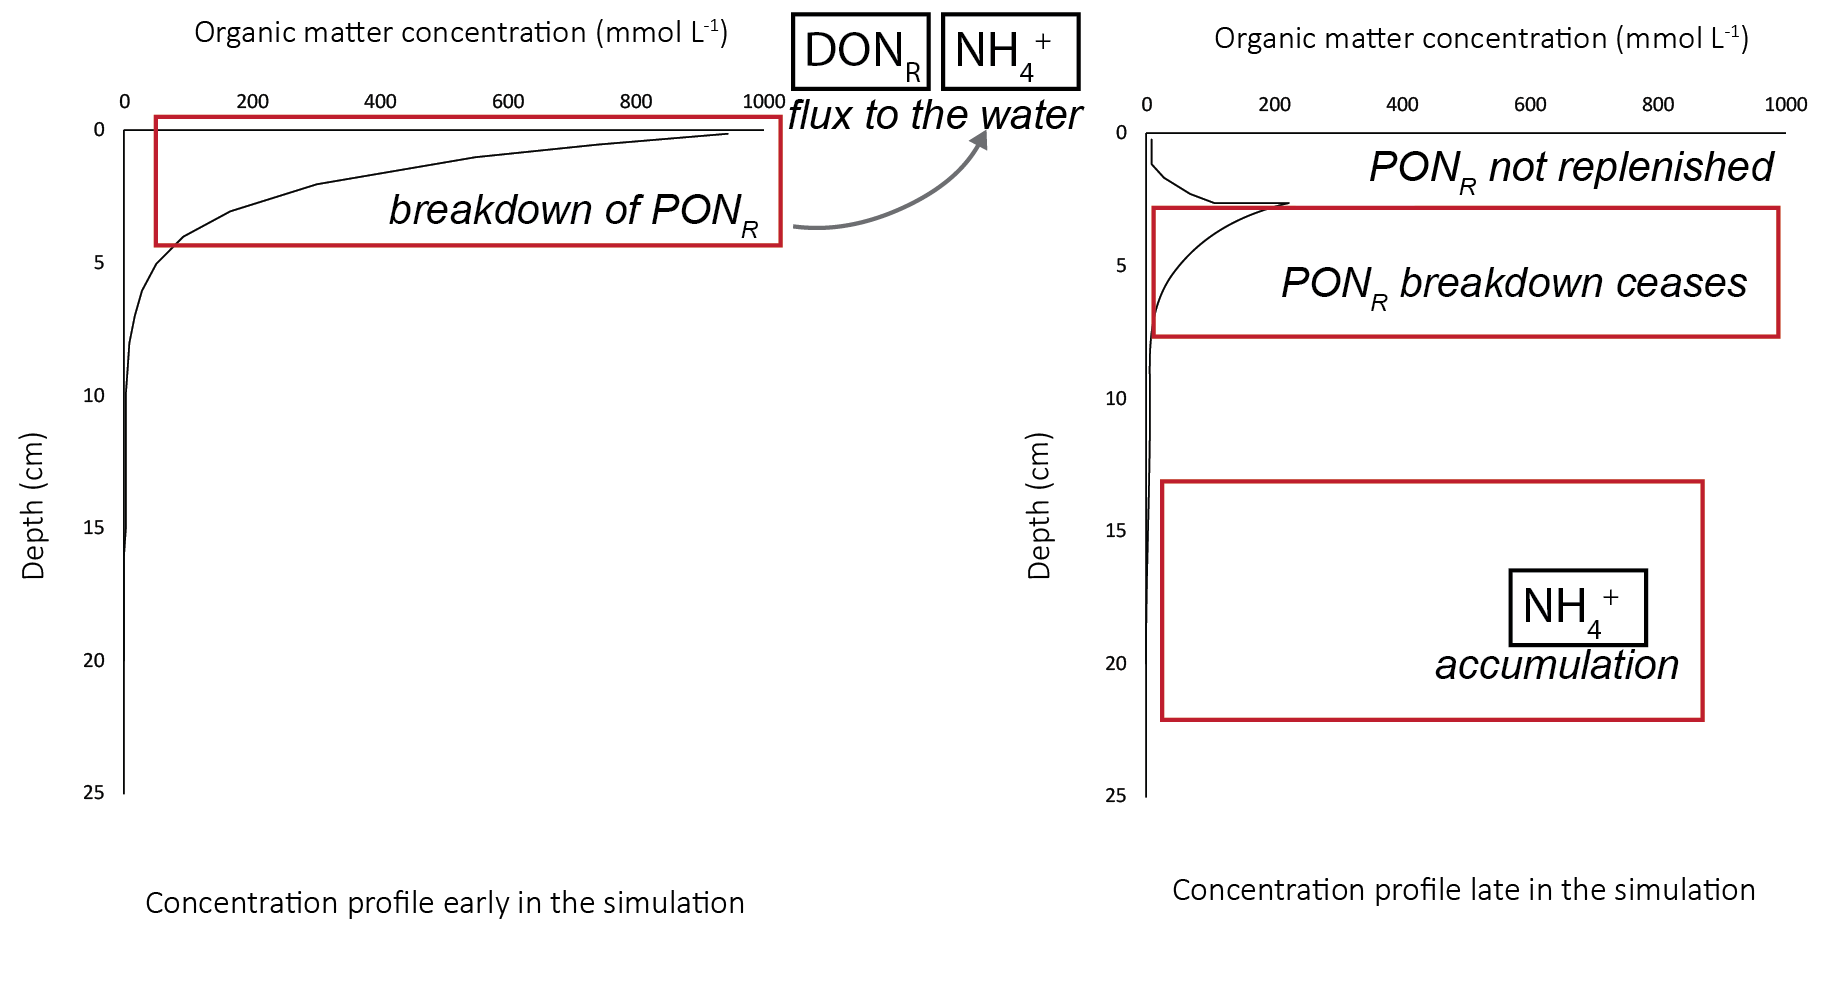 Schematic of the fate of $PON_R$ over the course of a long simulation. Left - in the initial phase, the concentration resembled the initial profile. The $PON_R$ broke down to $DON_R$ and $NH_4^+$. Right - later in the simulation, the upper 5 cm had a much lower $PON_R$ concentration.